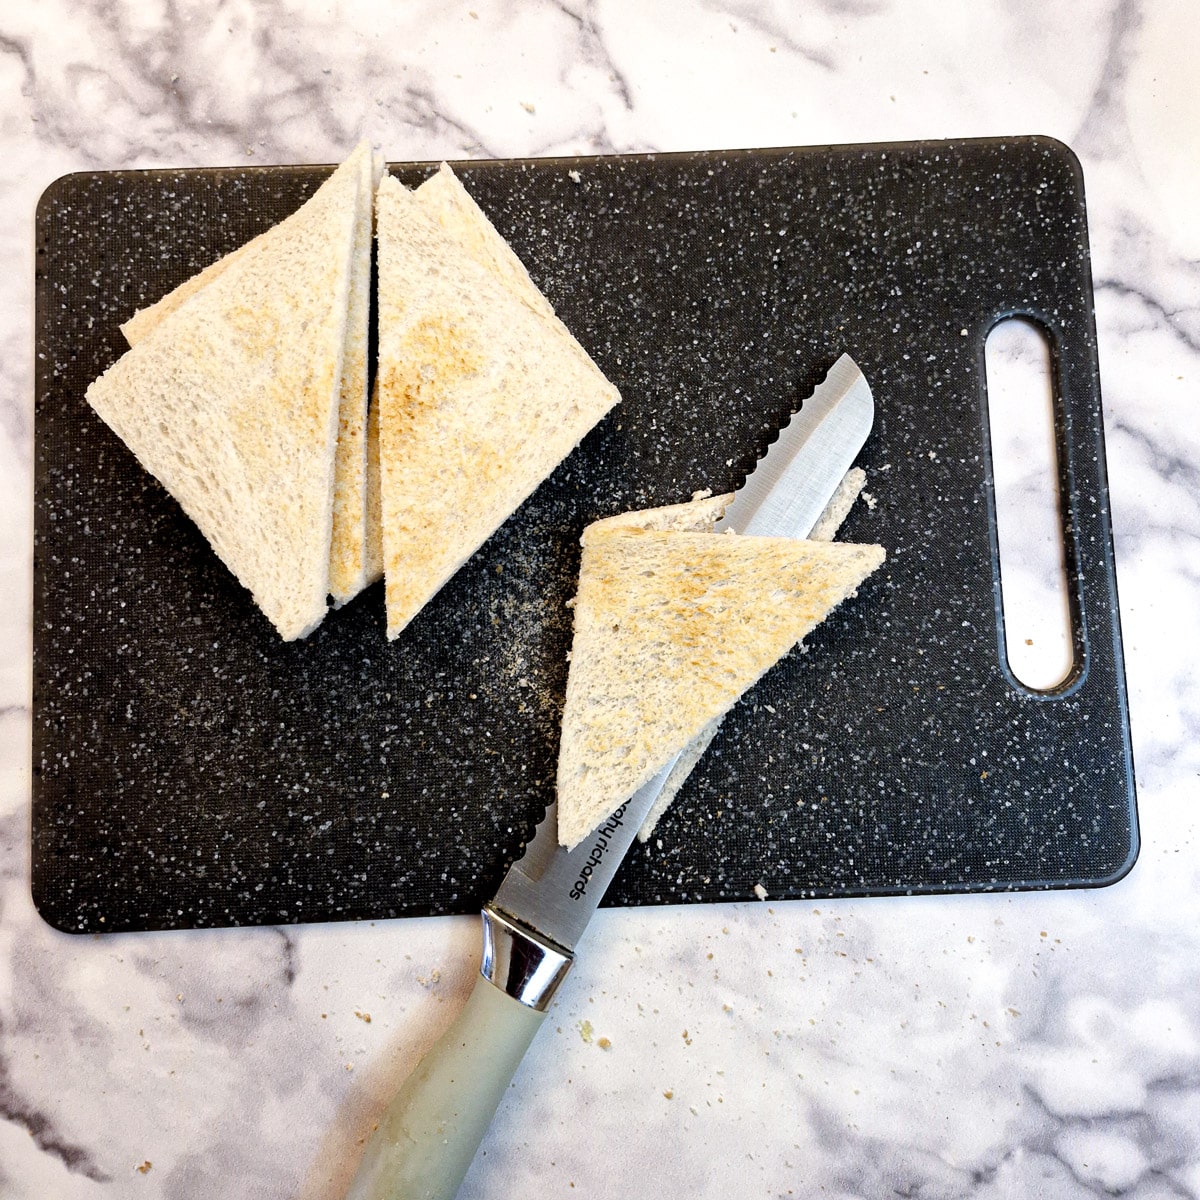 Slice of toast cut into triangles with one piece being cut through the middle to form 2 thinner triangles.